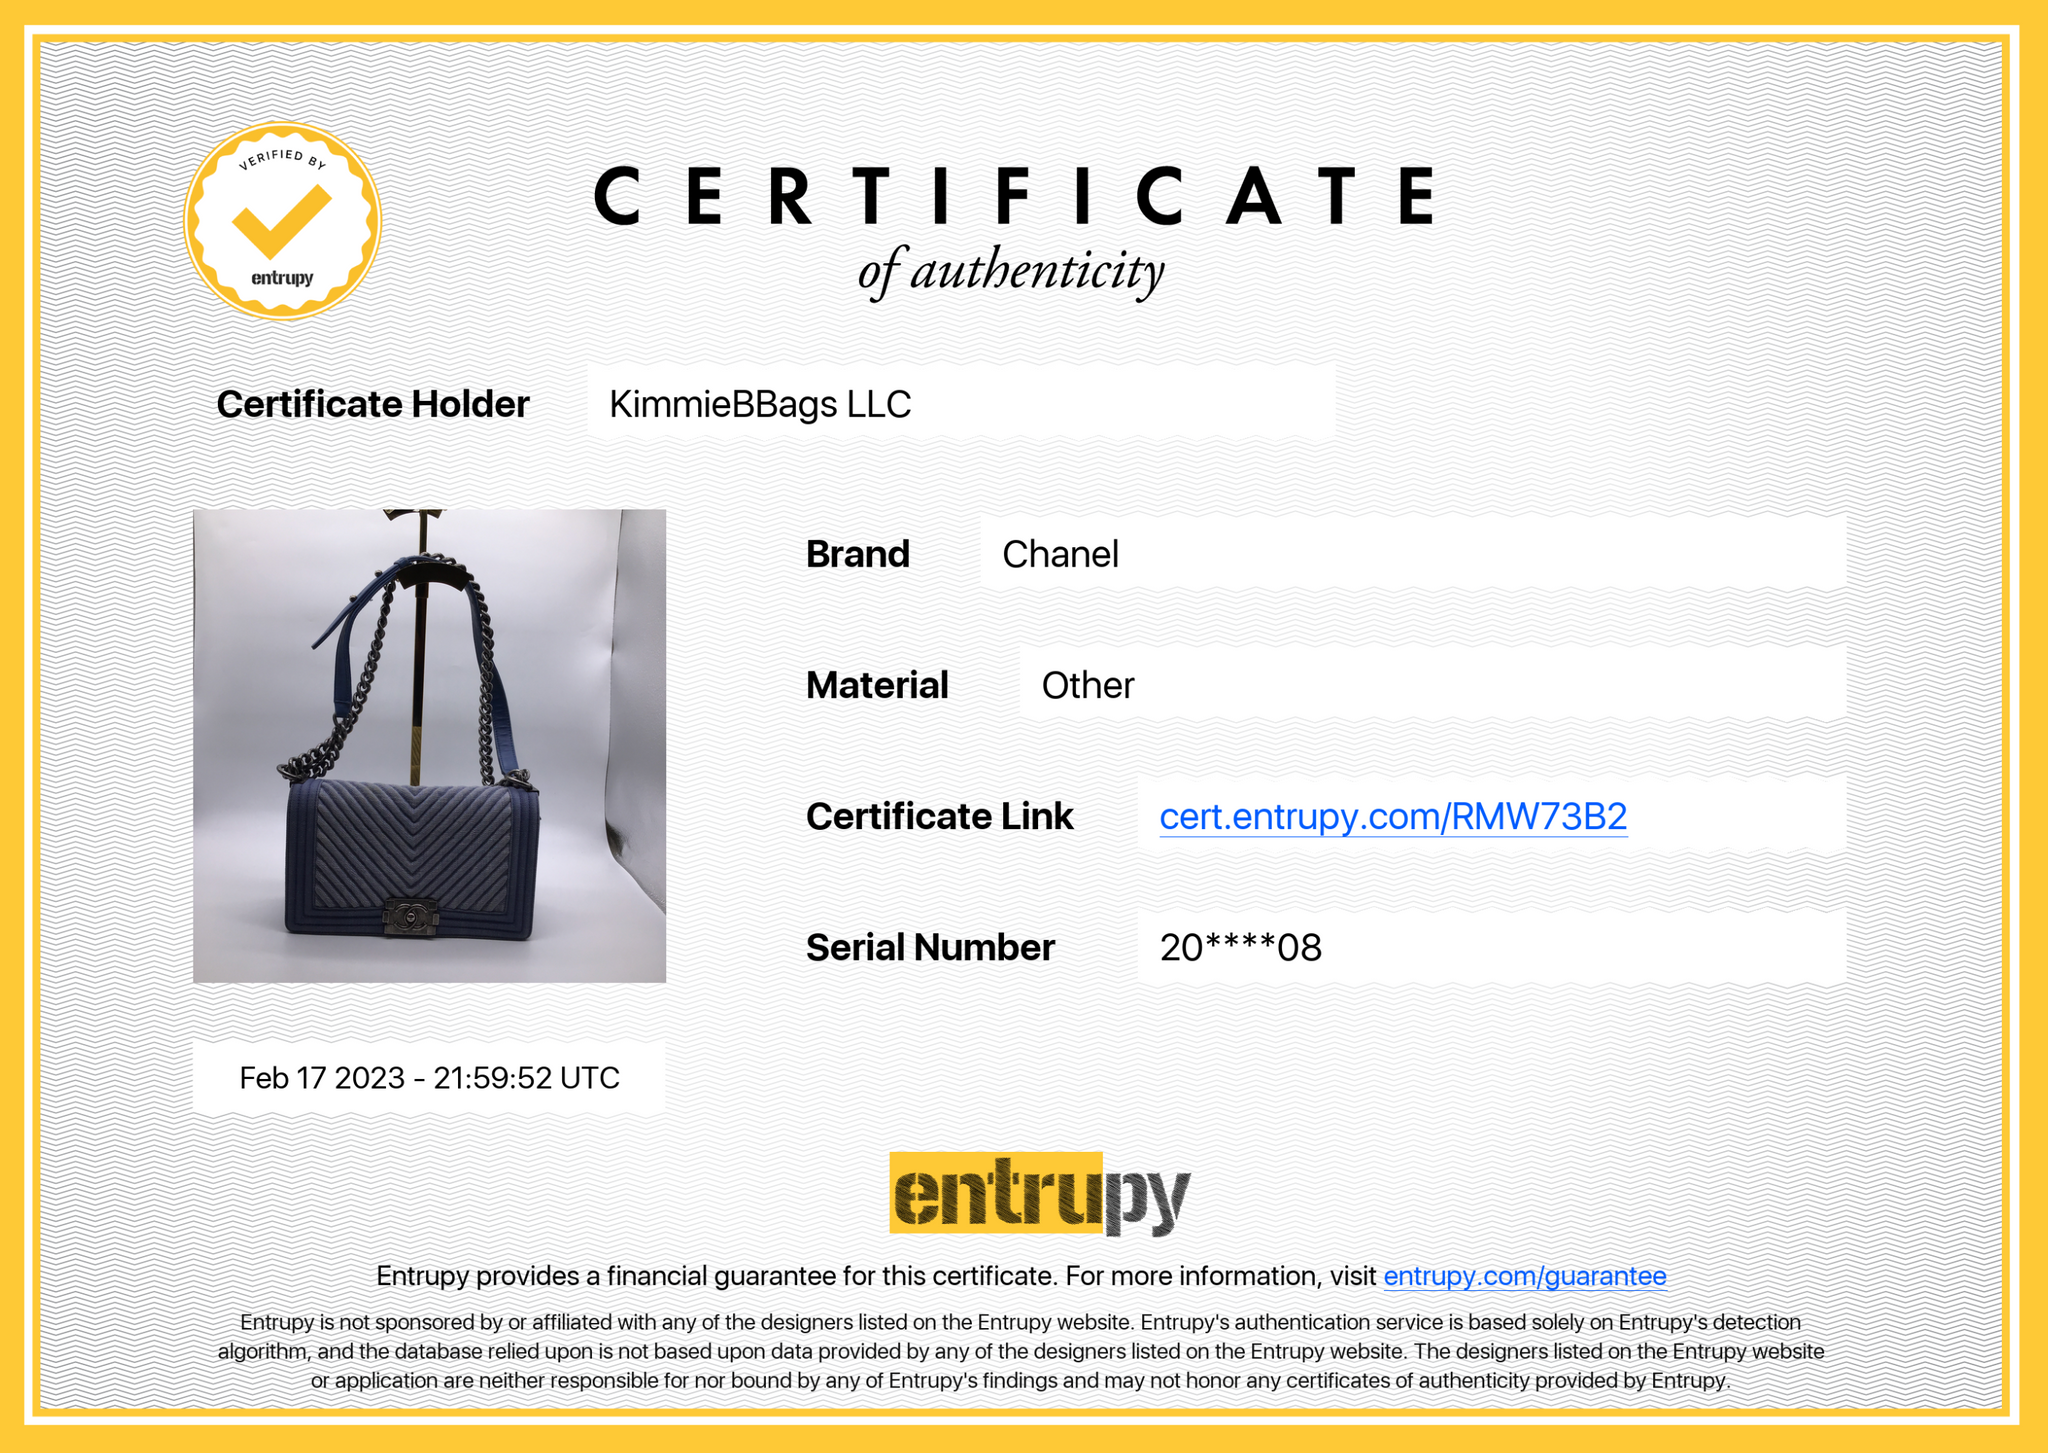 I Bought Myself The Chanel Chain Tote Bag At Auction! - Fashion